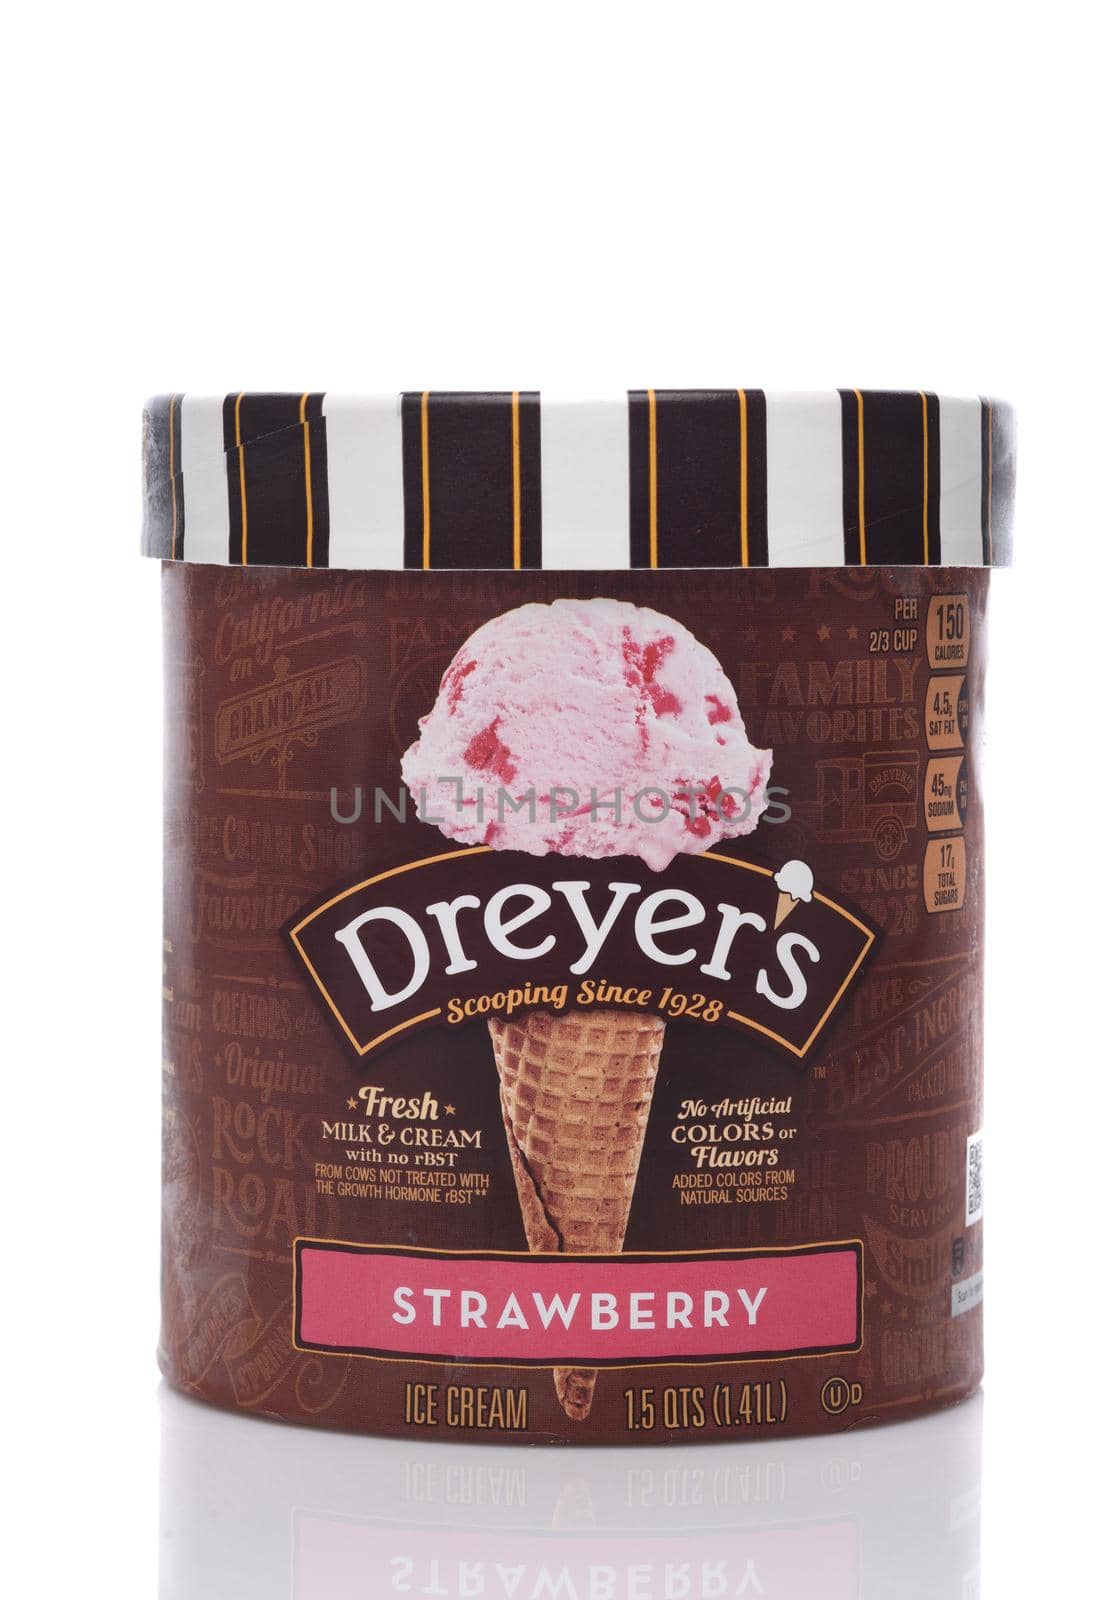 IRVINE, CALIFORNIA - 26 APRIL 2020:  A Carton of Dreyers Strawberry Ice Cream, isolated on white with reflection.  by sCukrov